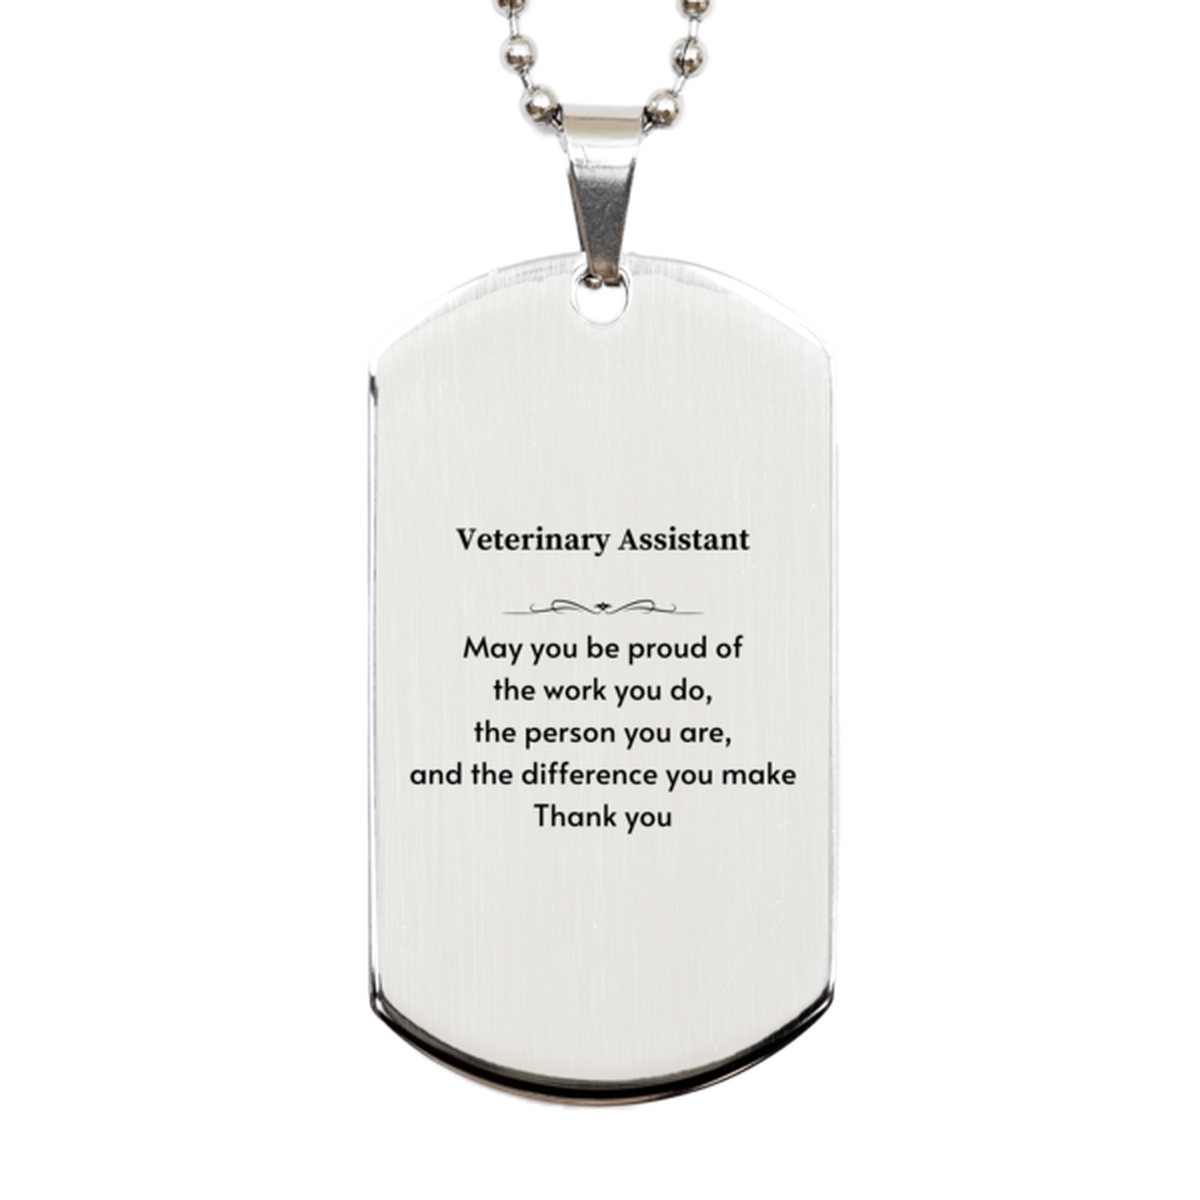 Heartwarming Silver Dog Tag Retirement Coworkers Gifts for Veterinary Assistant, Veterinary Assistant May You be proud of the work you do, the person you are Gifts for Boss Men Women Friends